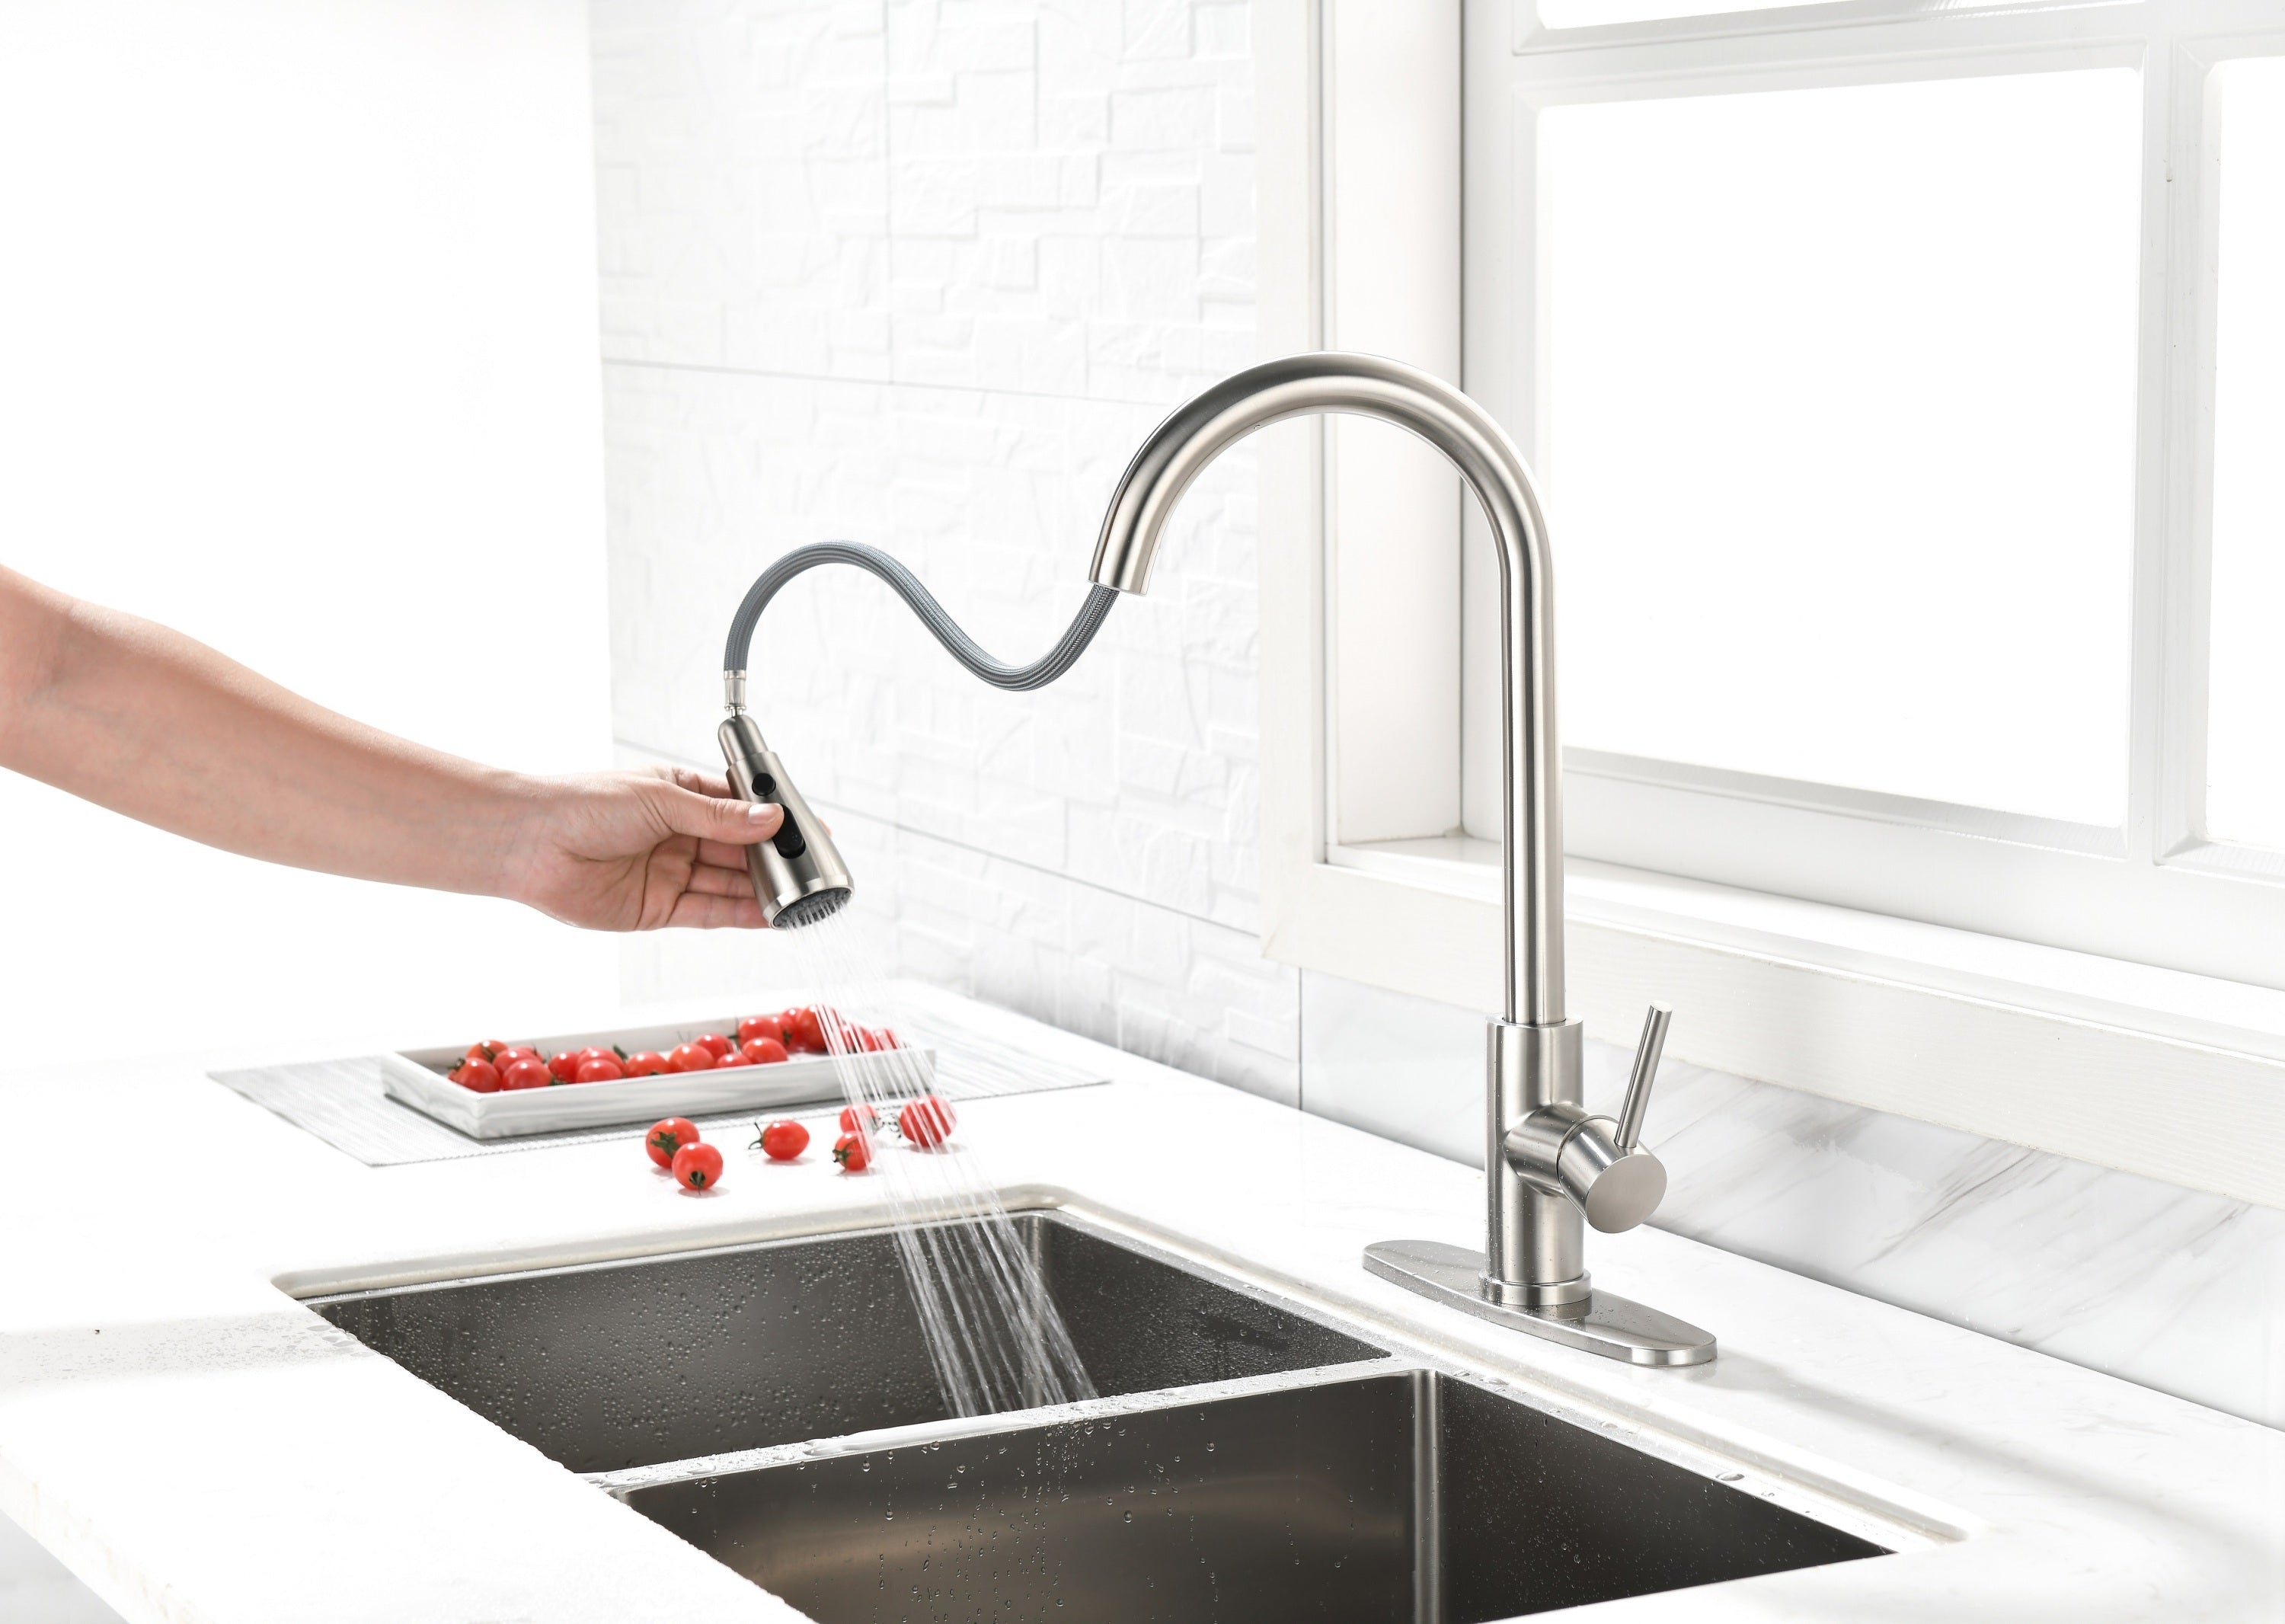 Single Handle High Arc Brushed Nickel Pull Out Kitchen Faucet, Single Level Stainless Steel Kitchen Sink Faucets with Pull Down Sprayer